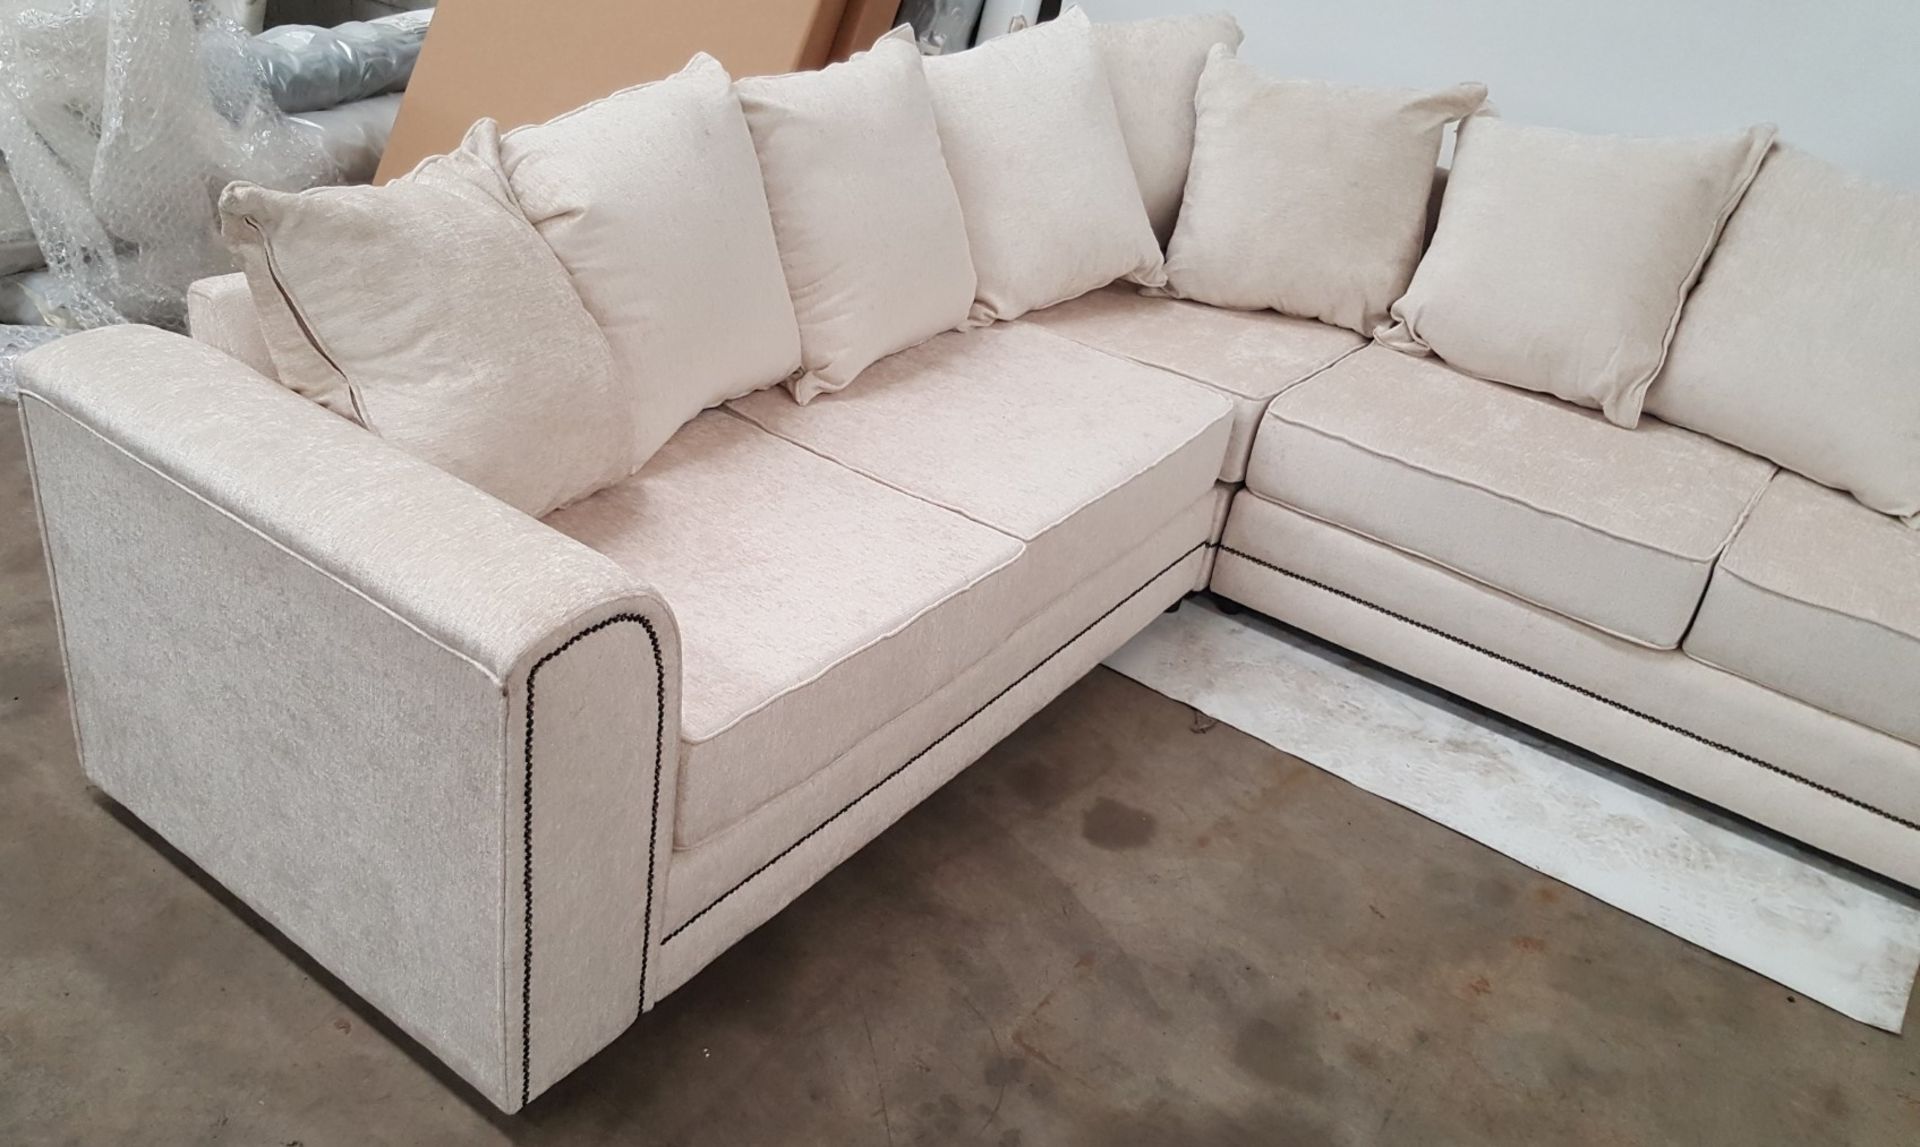 1 x Luxurious Pearl White Fabric L-Shaped Corner Seater Sofa - Ref BY198 - Image 3 of 7